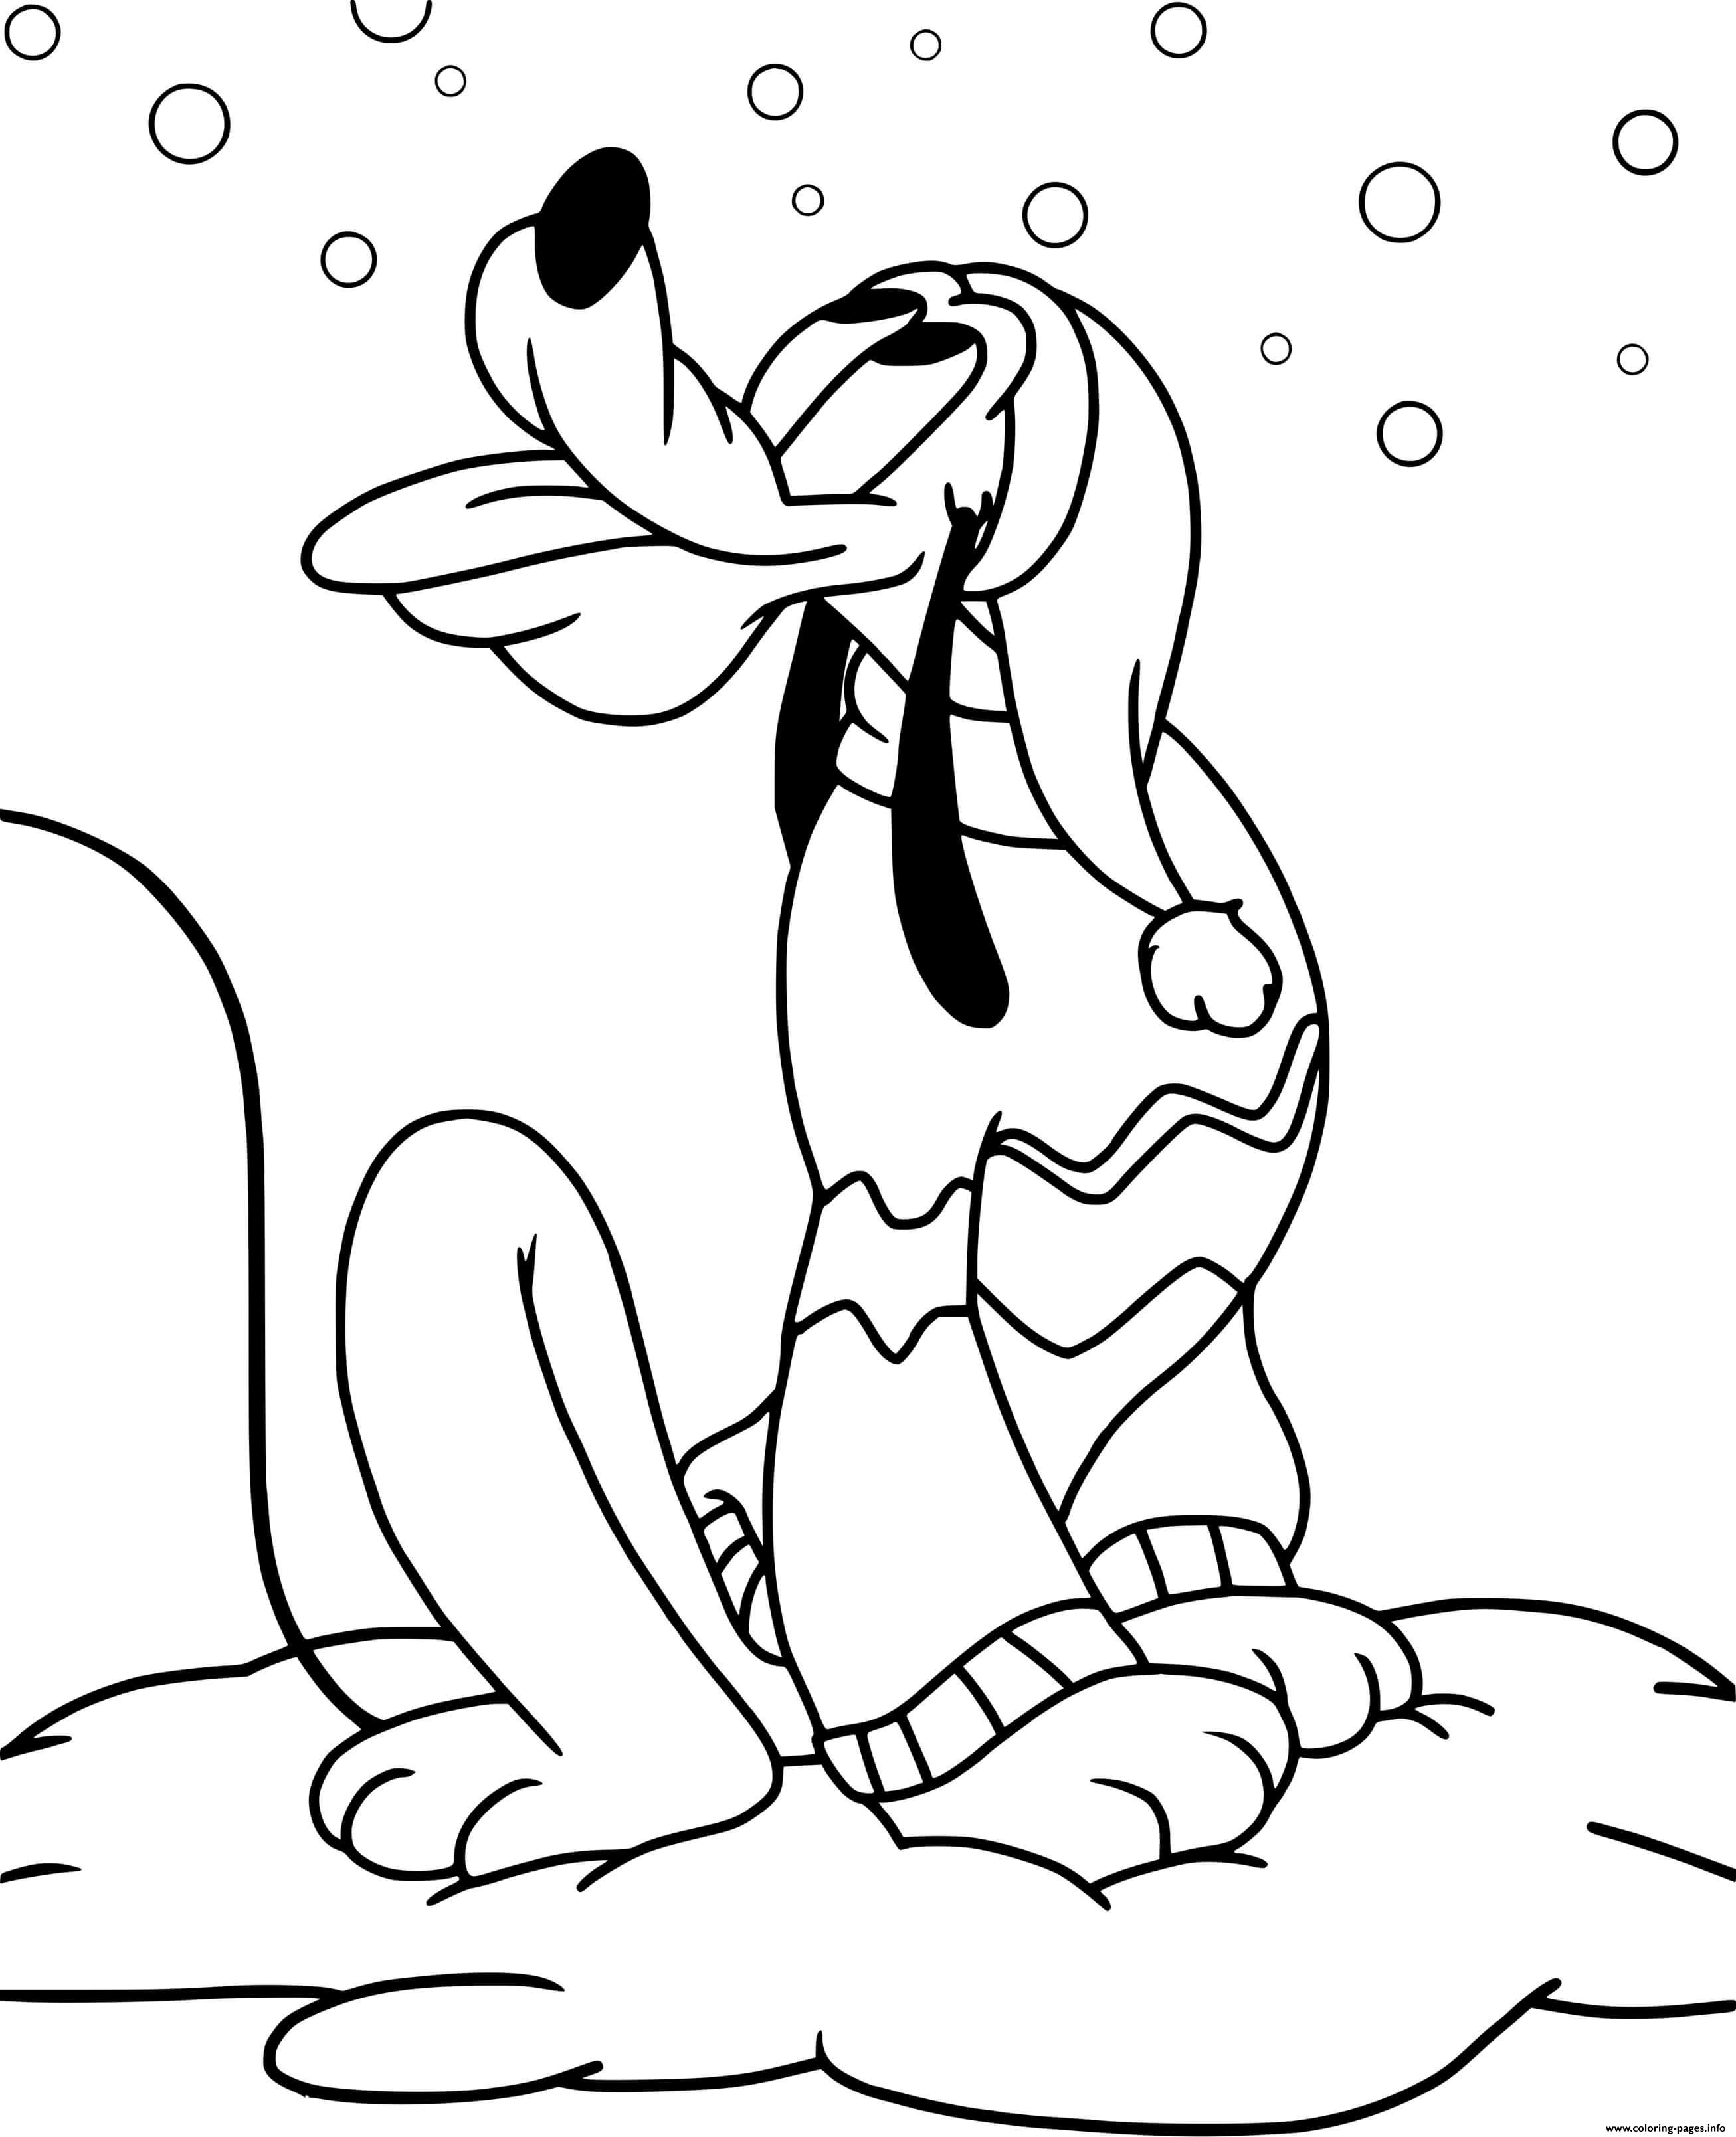 Pluto Eating Falling Snow coloring